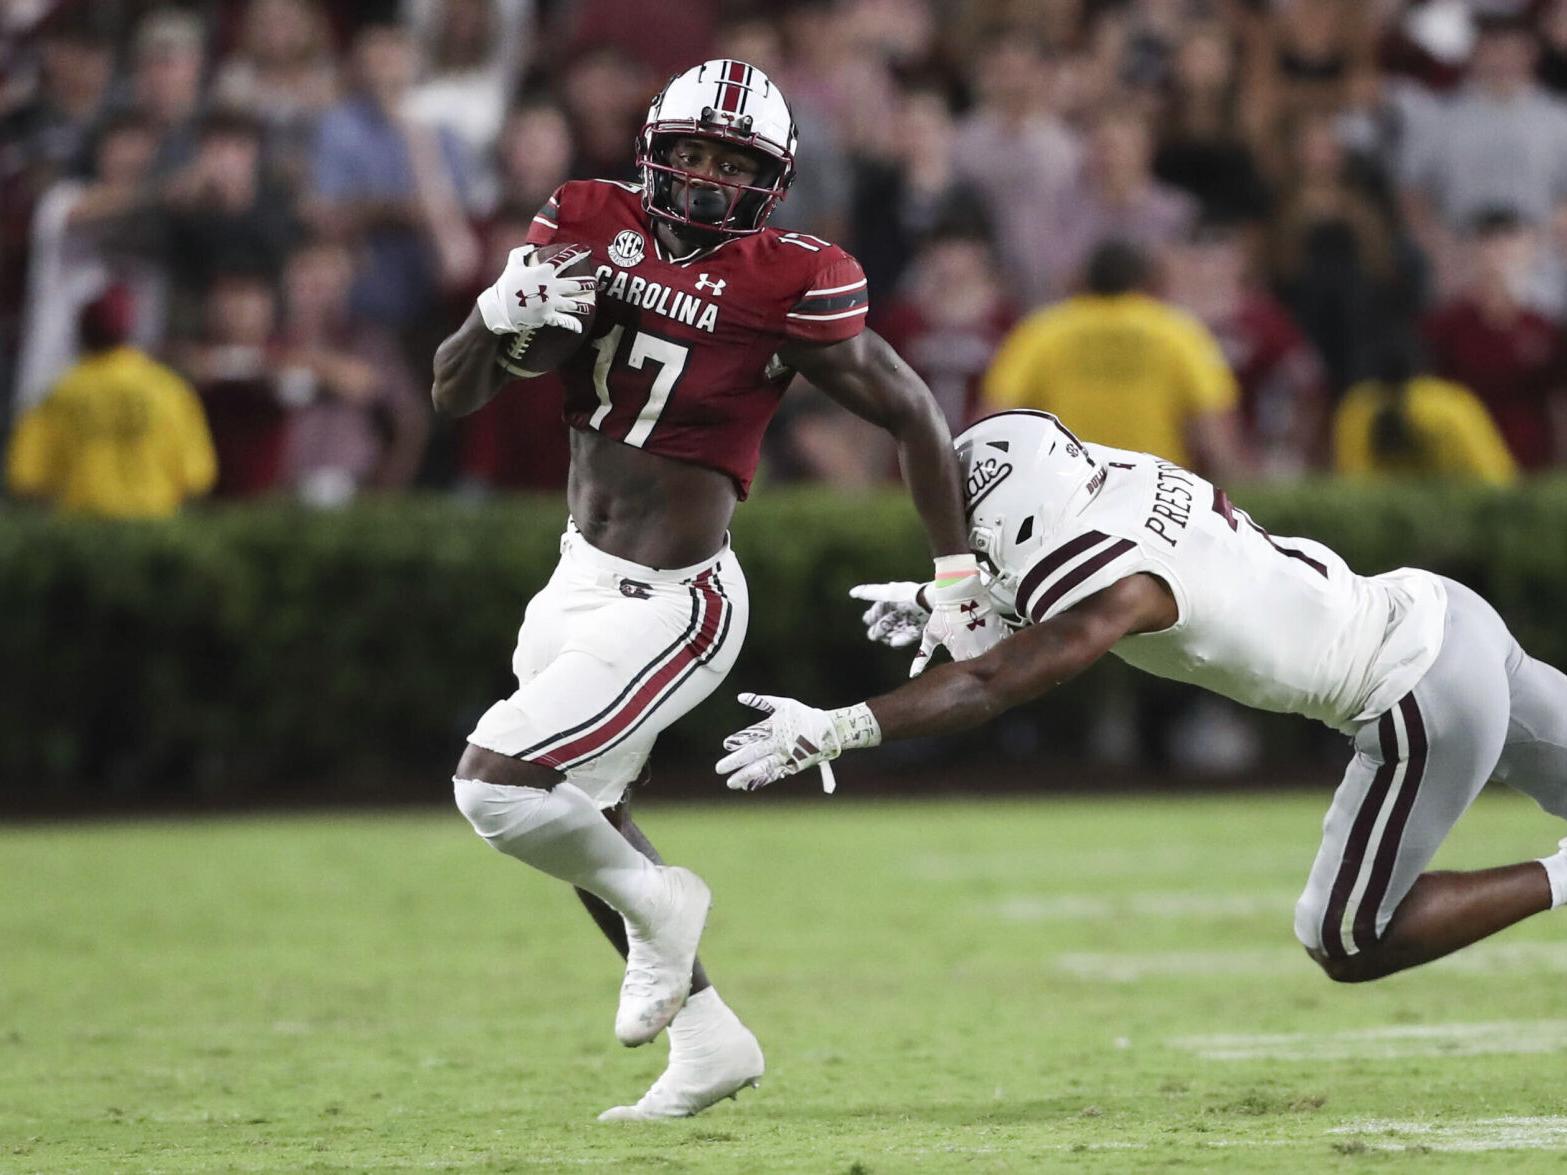 A leg above the rest: Against Mizzou, South Carolina WR Legette looks to continue early-season havoc | Tiger Kickoff | columbiamissourian.com